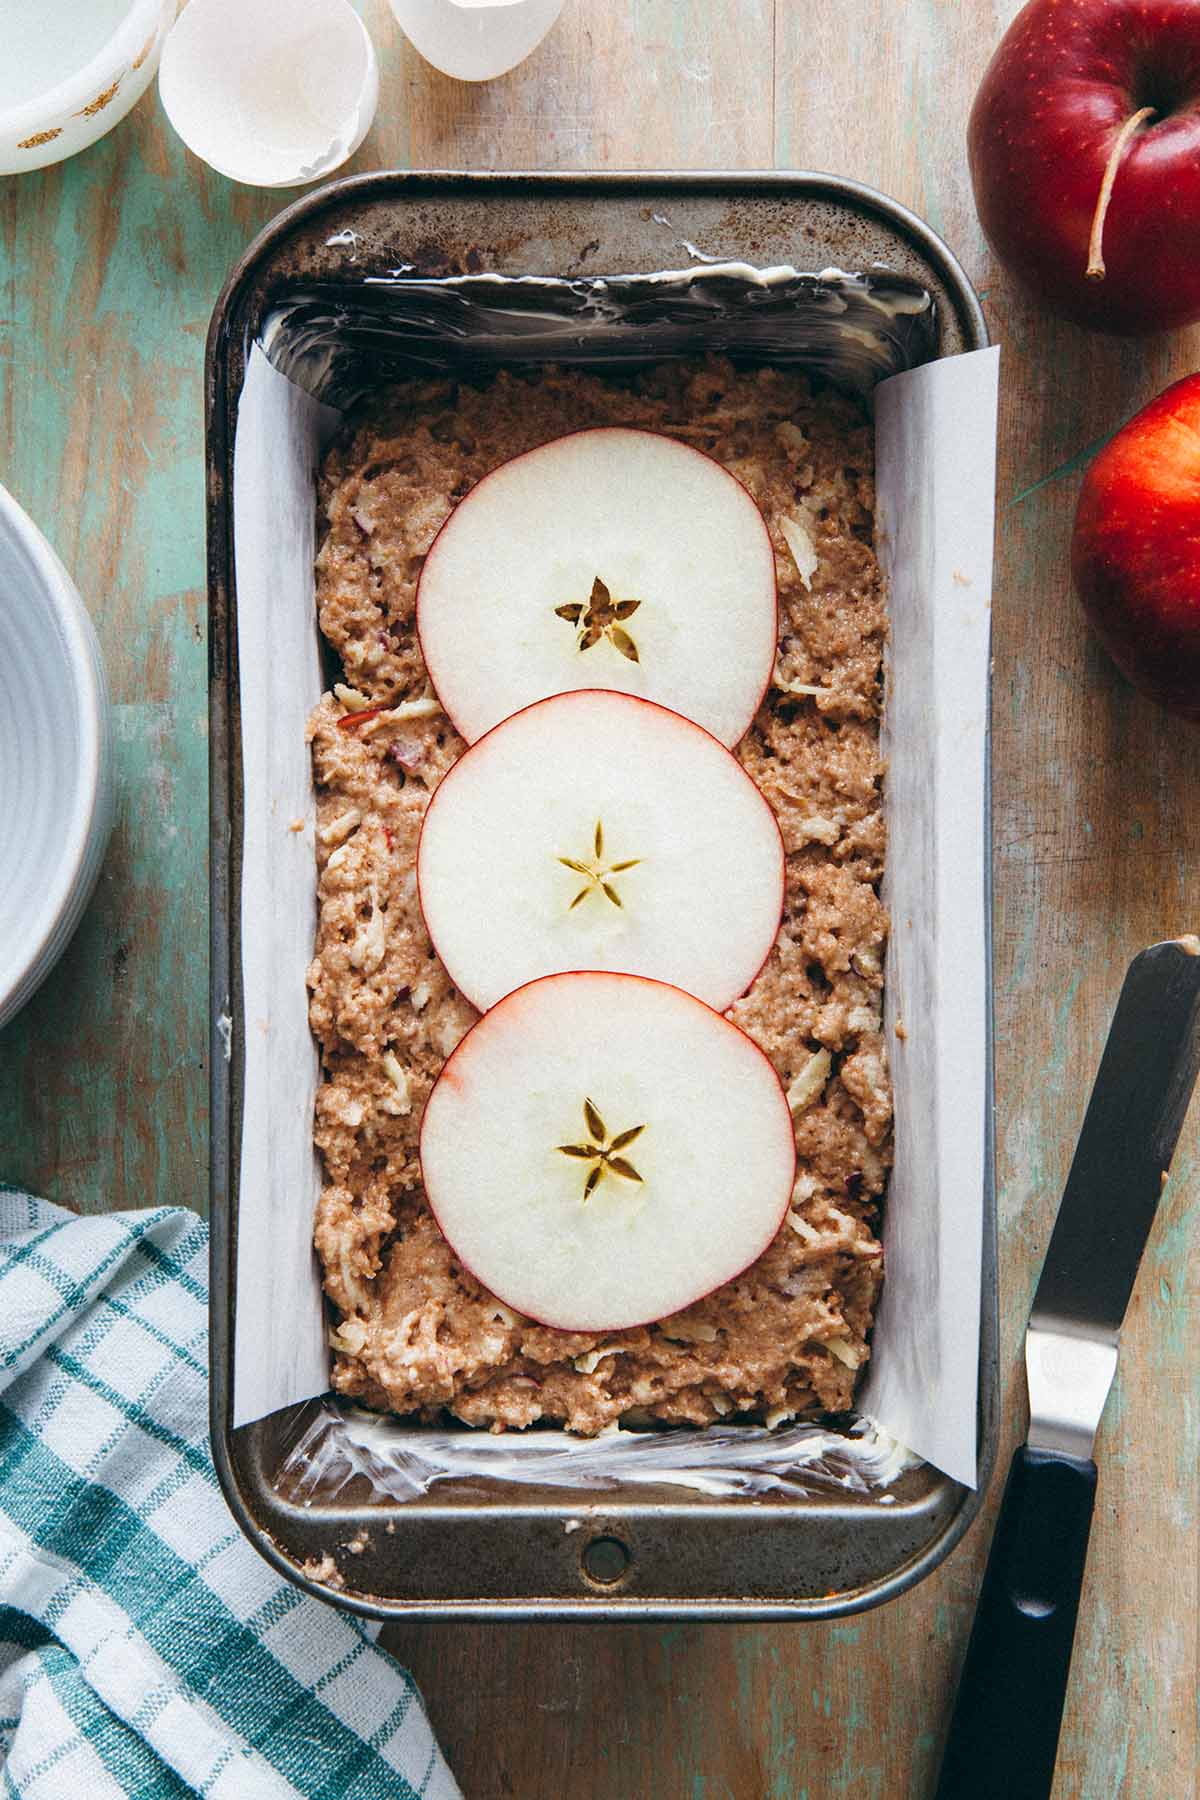 Unbaked apple loaf with three thin apple slices on top.